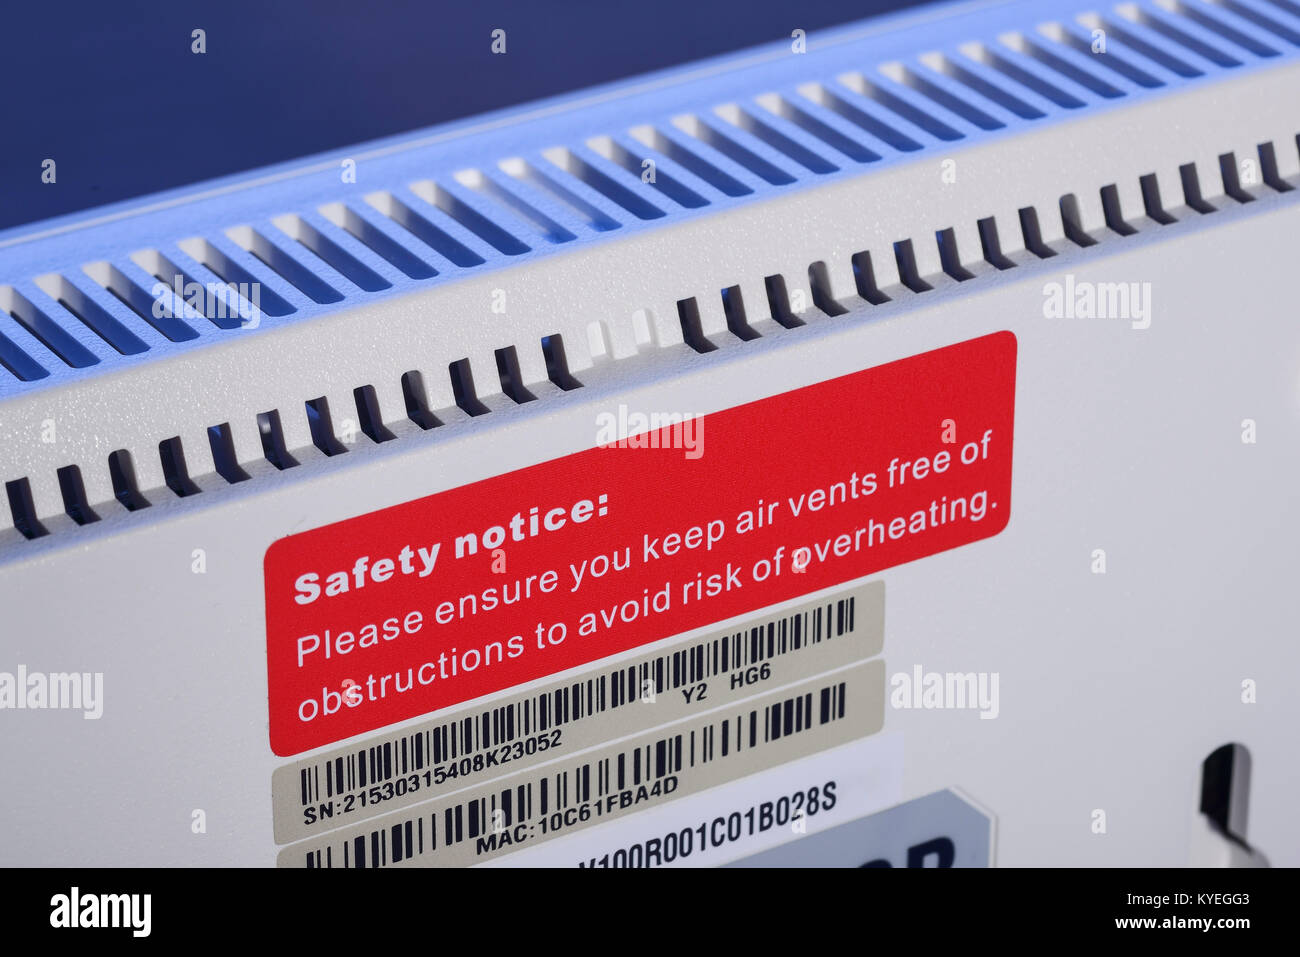 Safety warning notice on a modem router Stock Photo